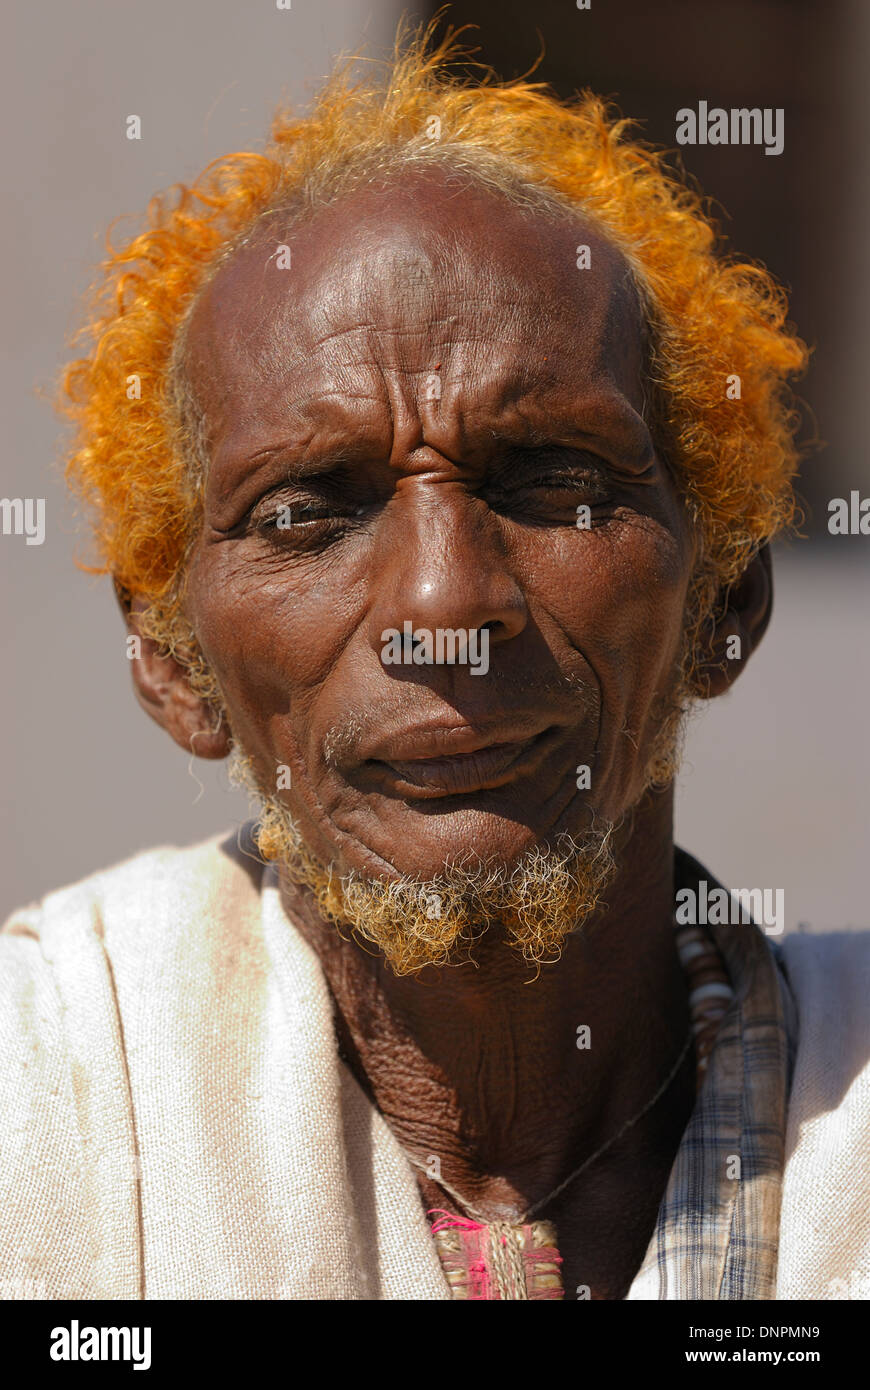 Download preview image - issa-man-in-dikhil-town-in-the-south-of-djibouti-horn-of-africa-DNPMN9